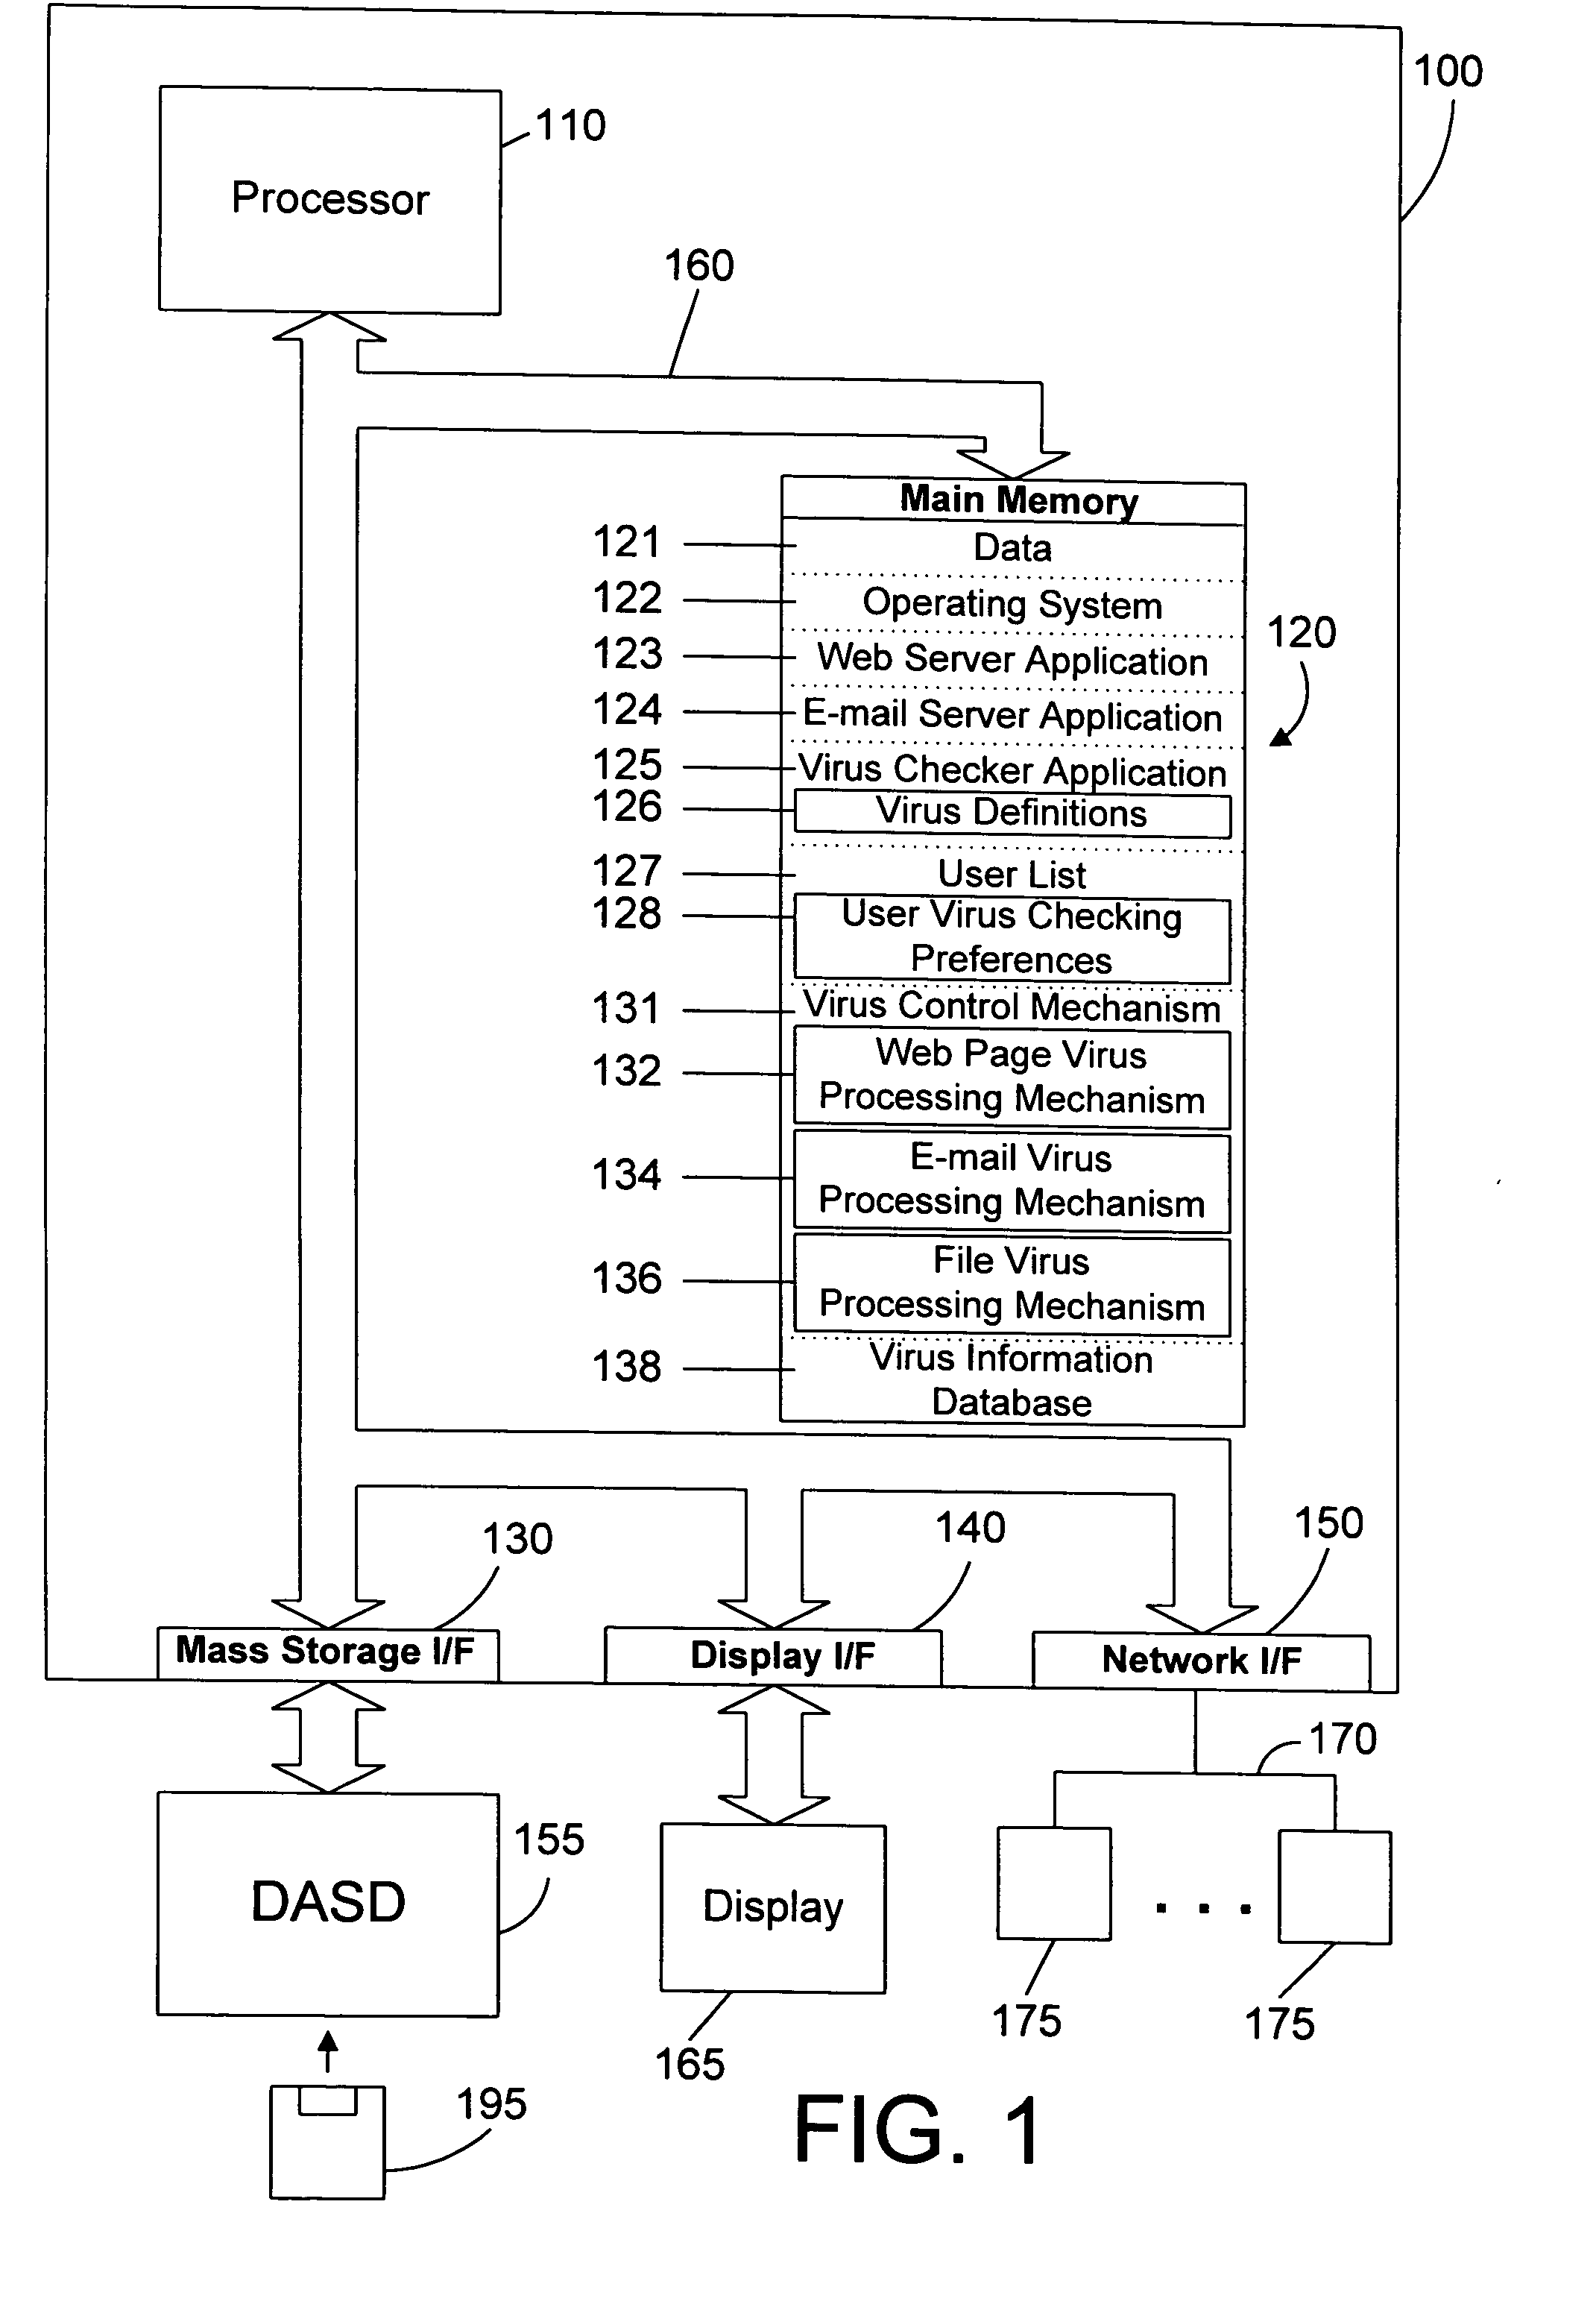 Web server apparatus and method for virus checking